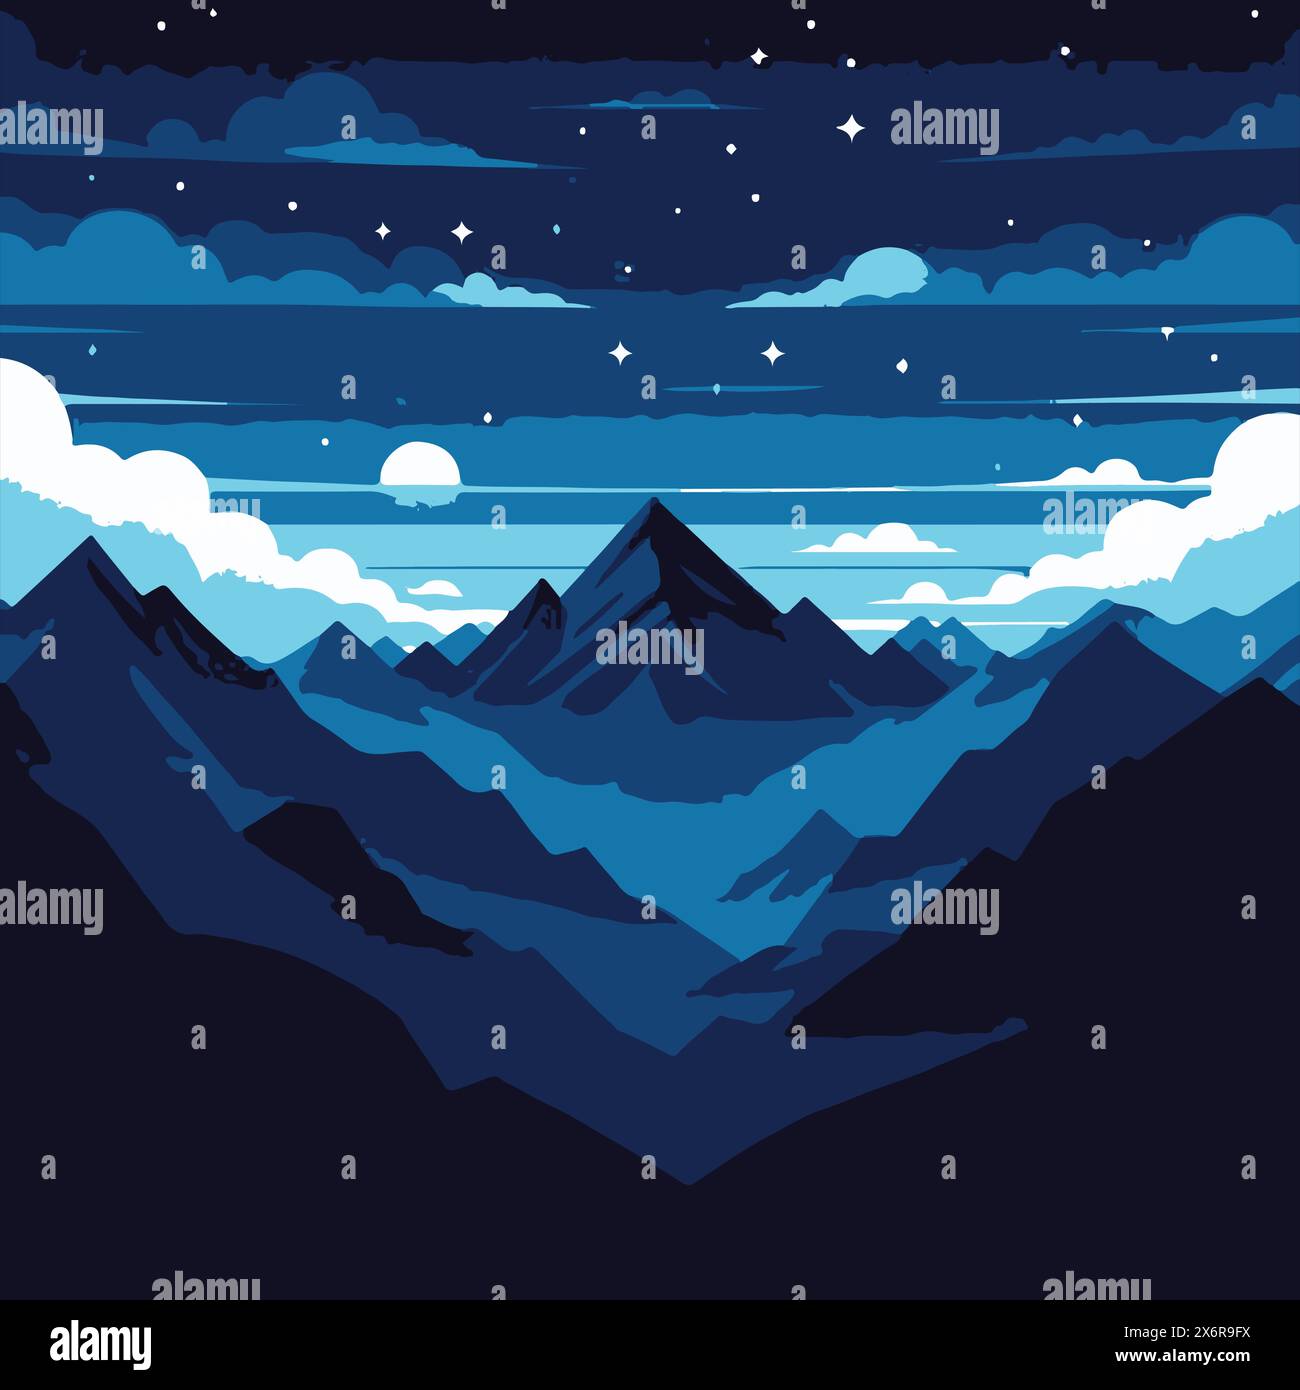 Melancholic Mountain Nights - A Serene Silhouette Illustration of Natural Landscapes Stock Vector